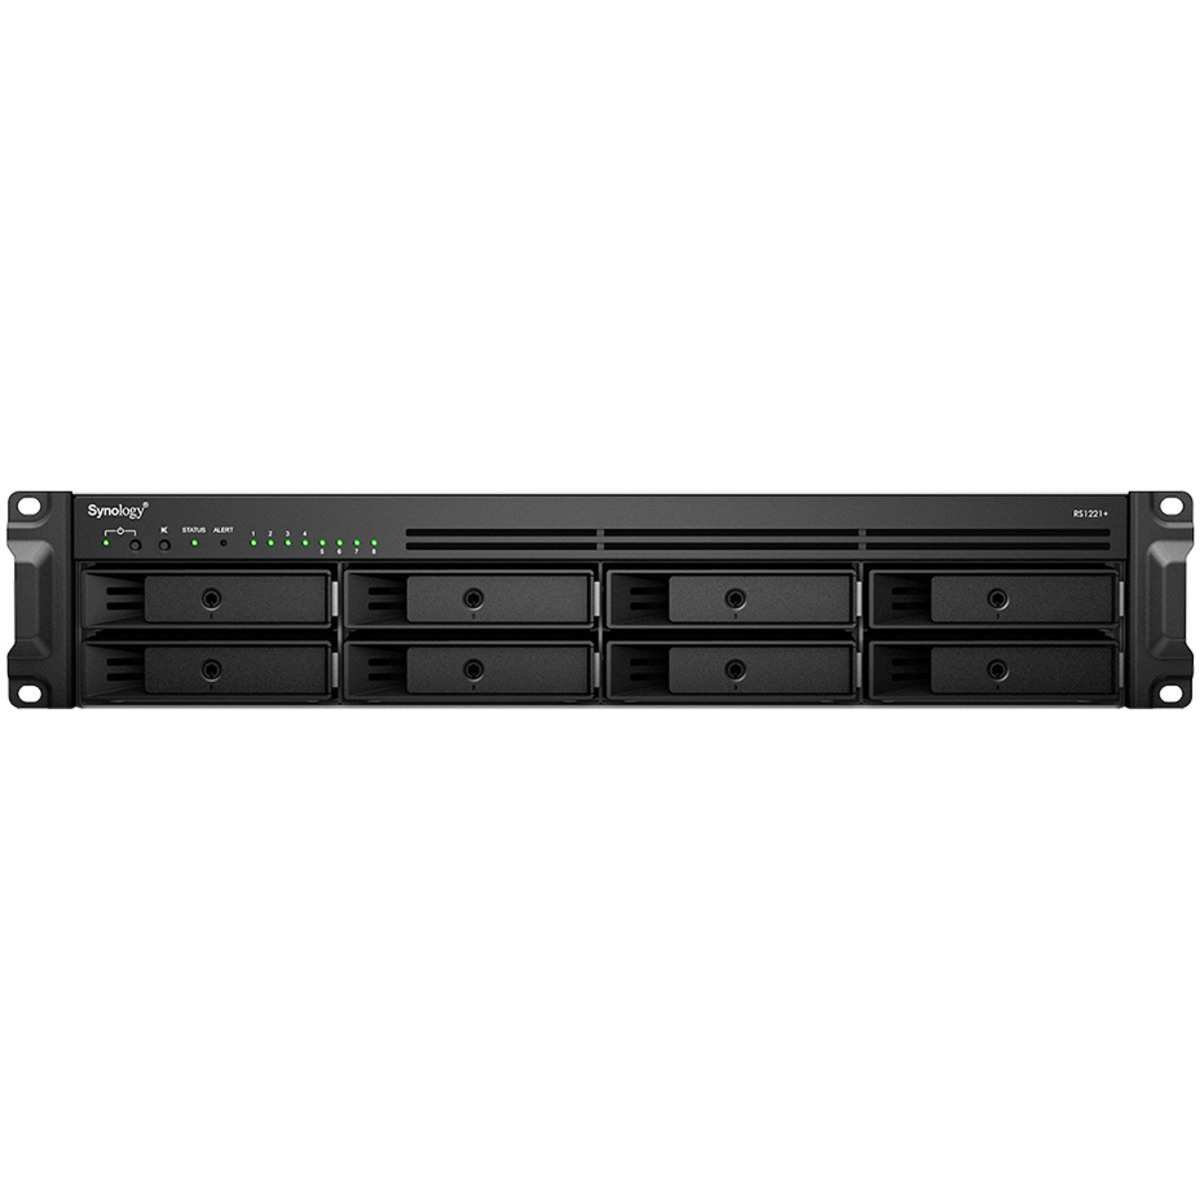 Synology RackStation RS1221RP+ 56tb 8-Bay RackMount Multimedia / Power User / Business NAS - Network Attached Storage Device 7x8tb Western Digital Red Pro WD8005FFBX 3.5 7200rpm SATA 6Gb/s HDD NAS Class Drives Installed - Burn-In Tested - FREE RAM UPGRADE RackStation RS1221RP+